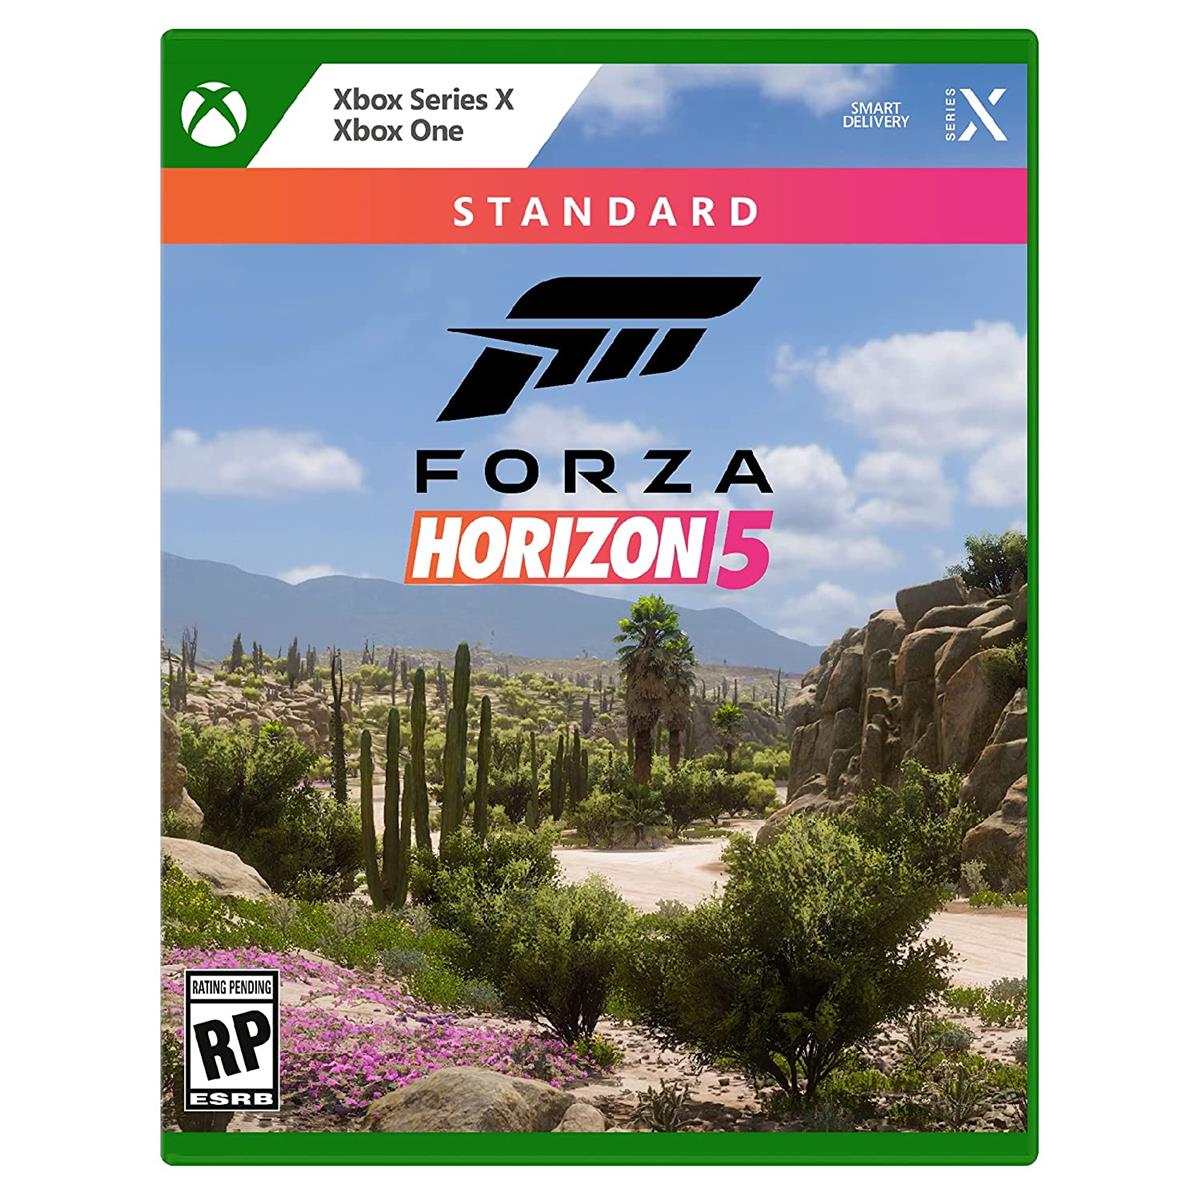 

Microsoft Forza Horizon 5 Standard Edition for Xbox One and Xbox Series X|S